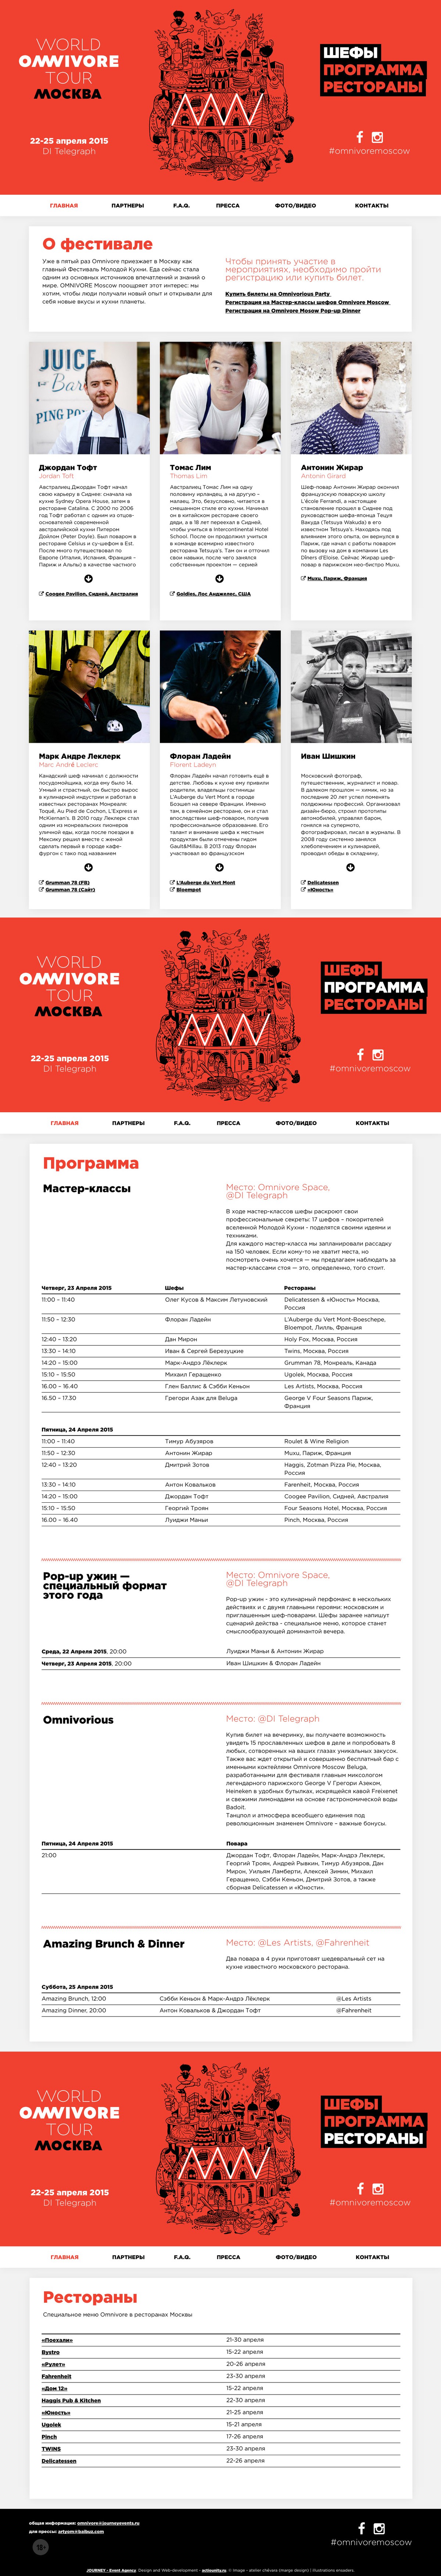 Website for OMNIVORE MOSCOW 2015